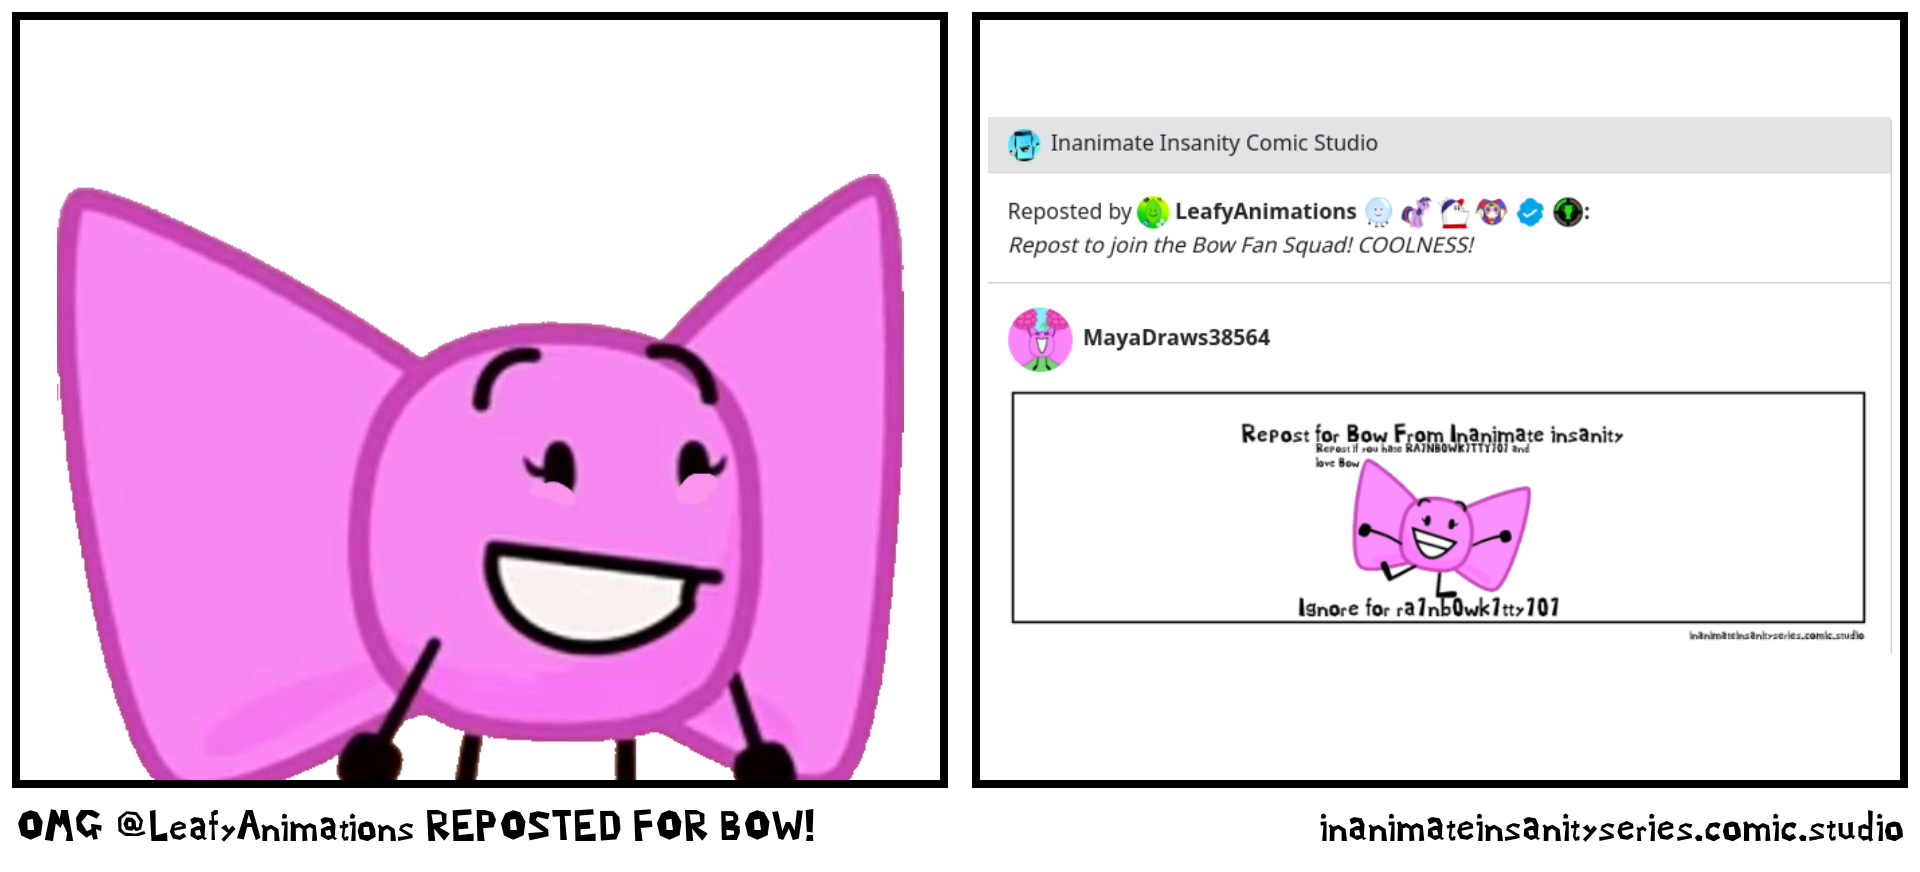 OMG @LeafyAnimations REPOSTED FOR BOW!